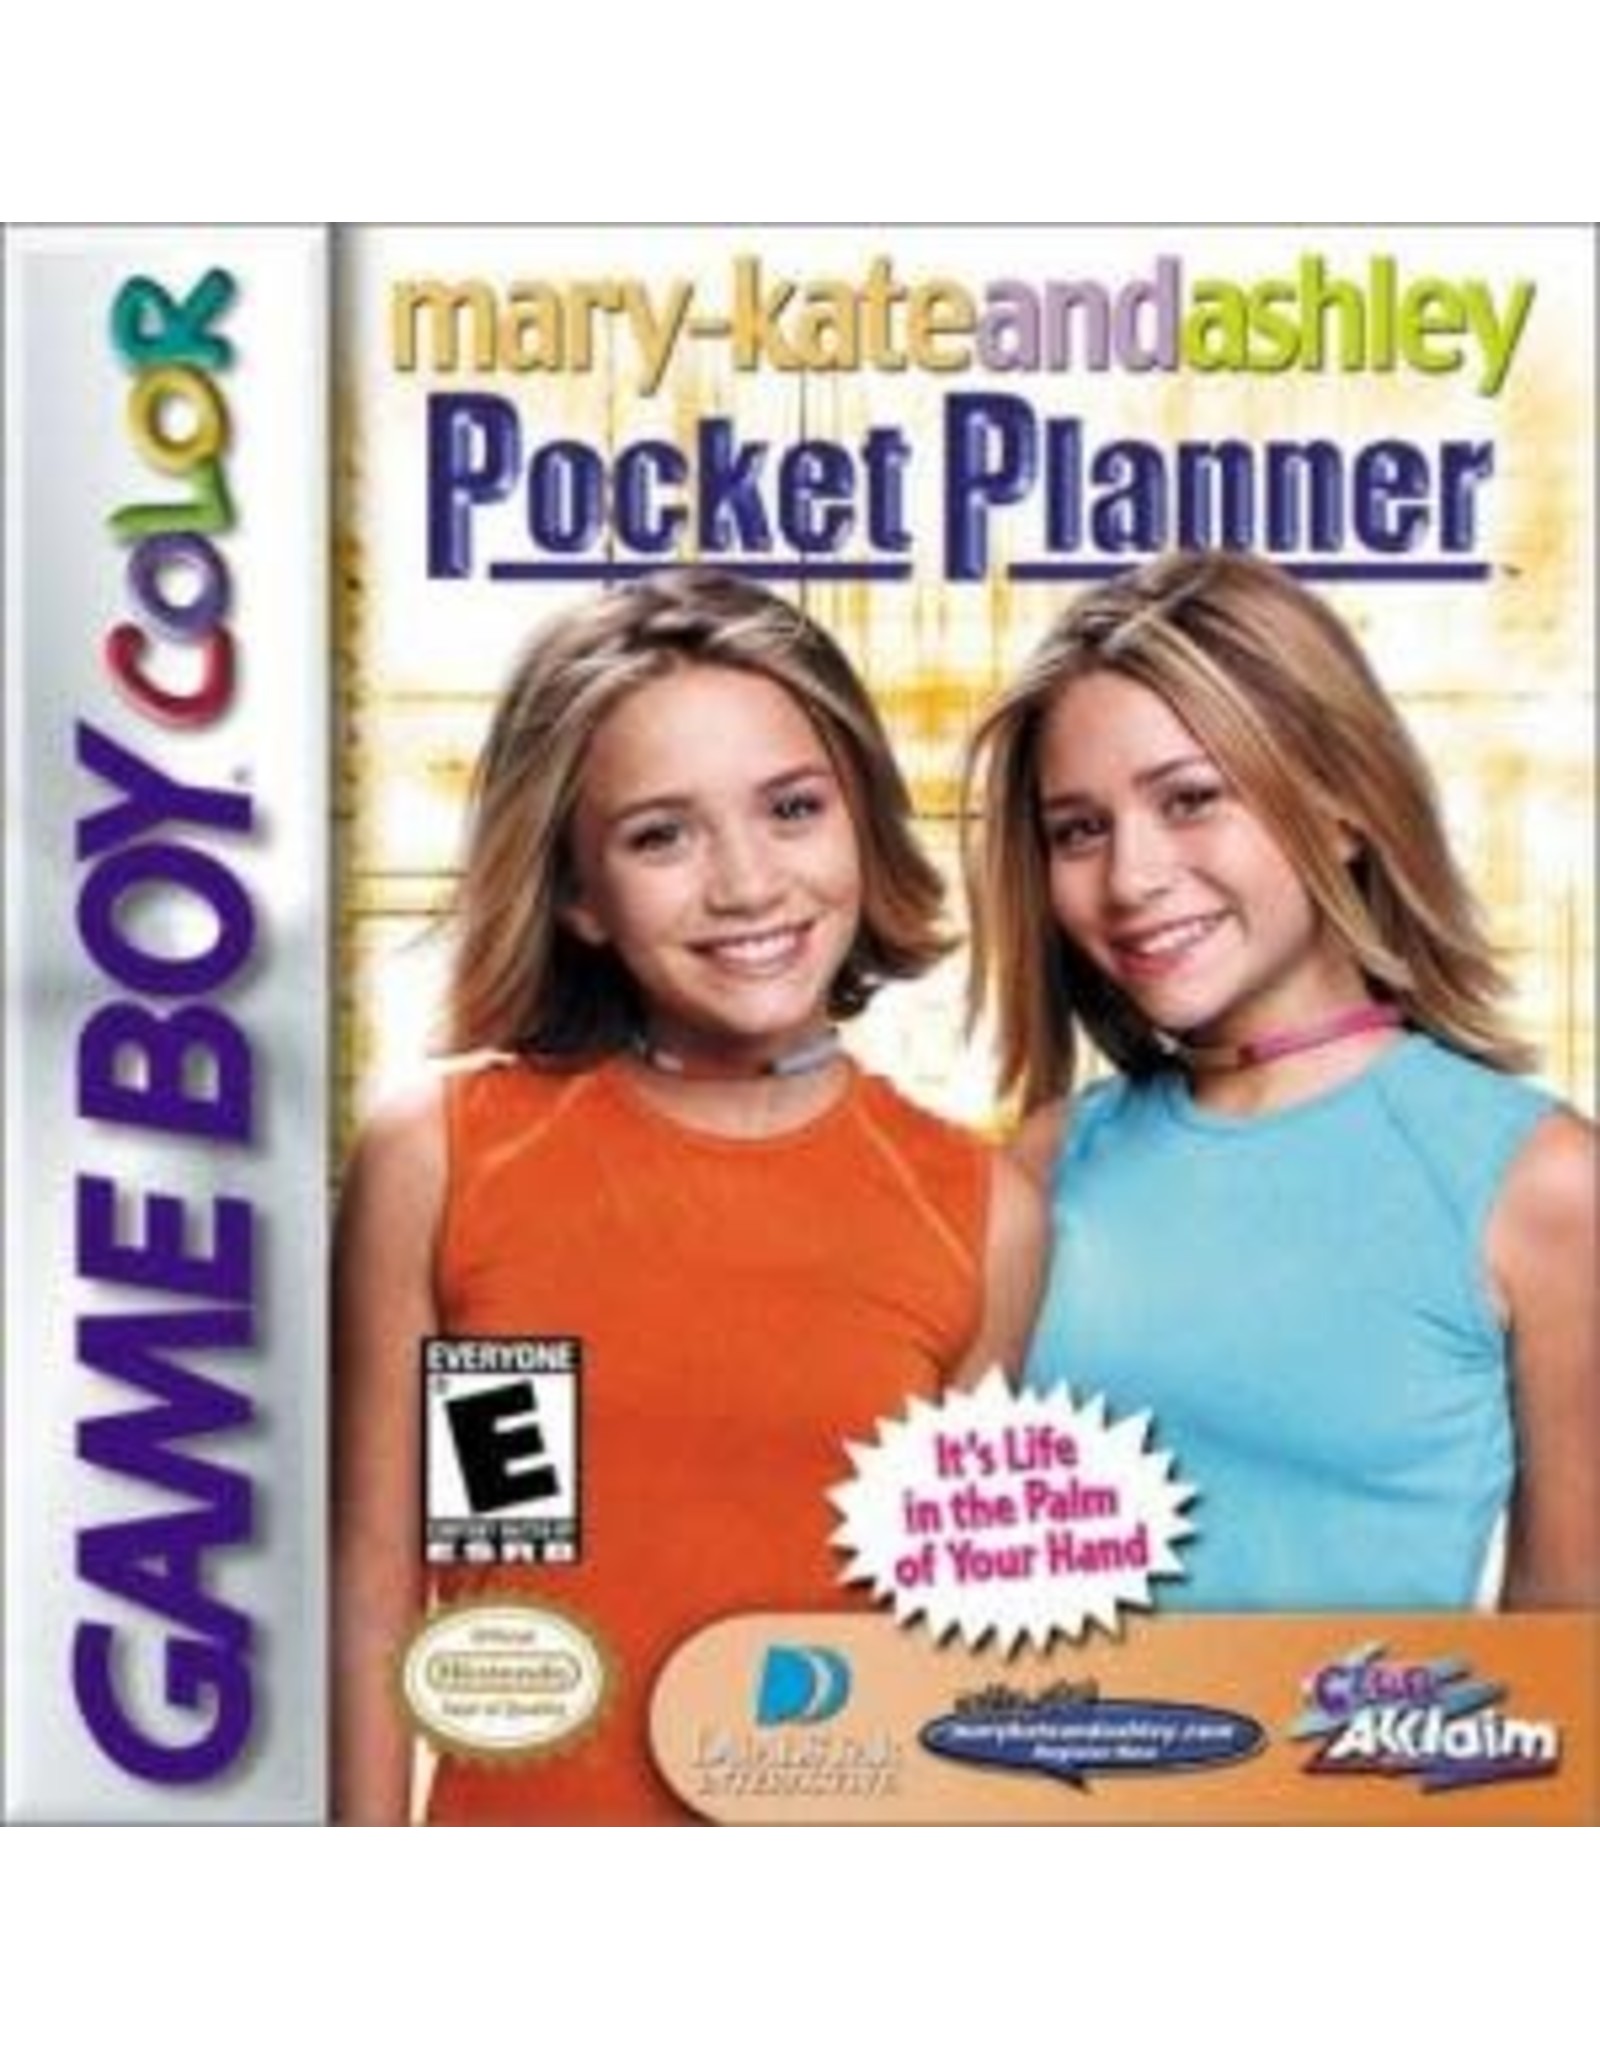 Game Boy Color Mary-Kate and Ashley Pocket Planner (Cart Only)